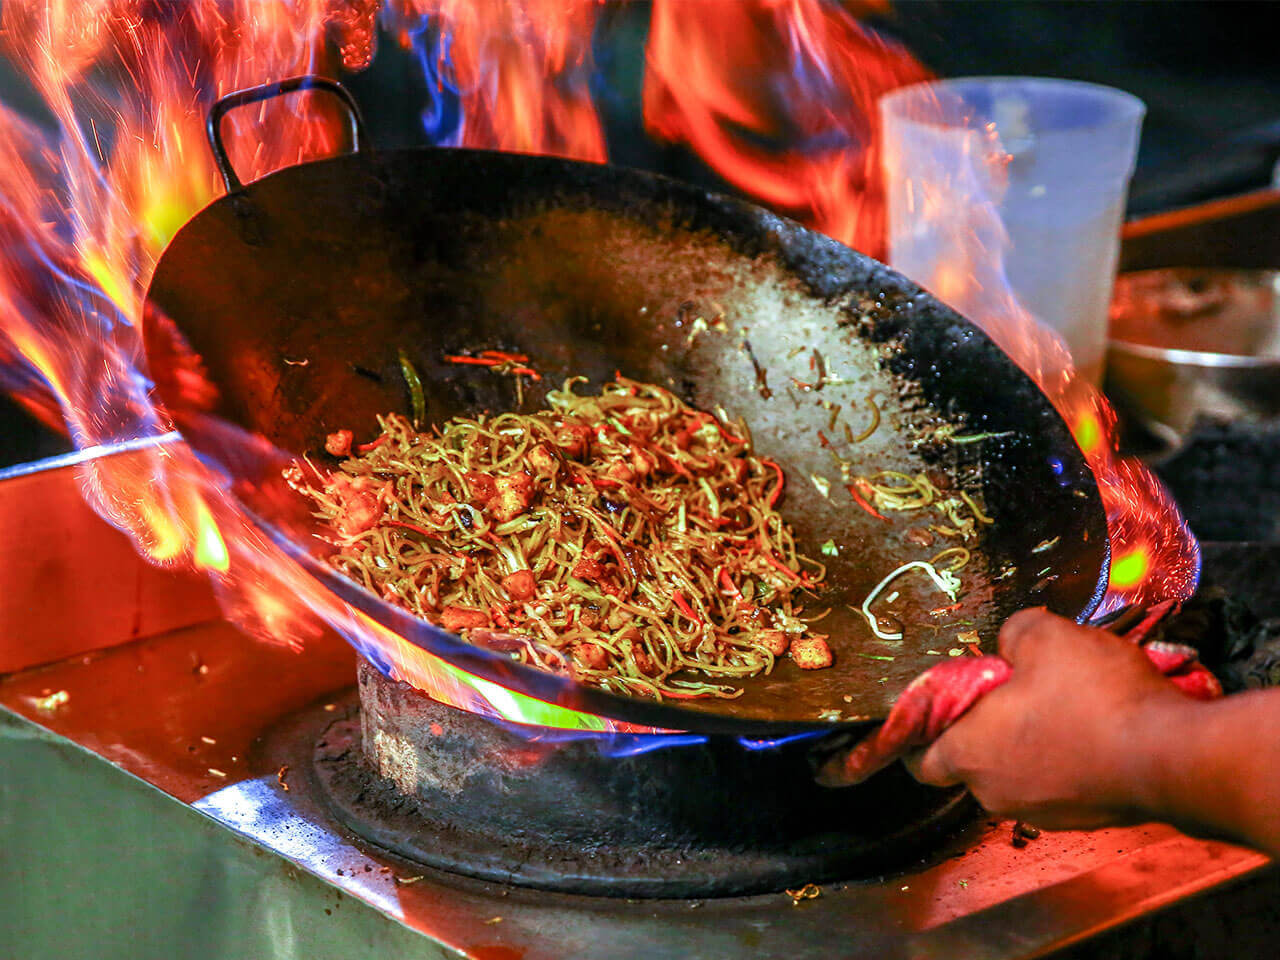 Chinese Cooking The New Way To Cook Food And Bring Variety To Life